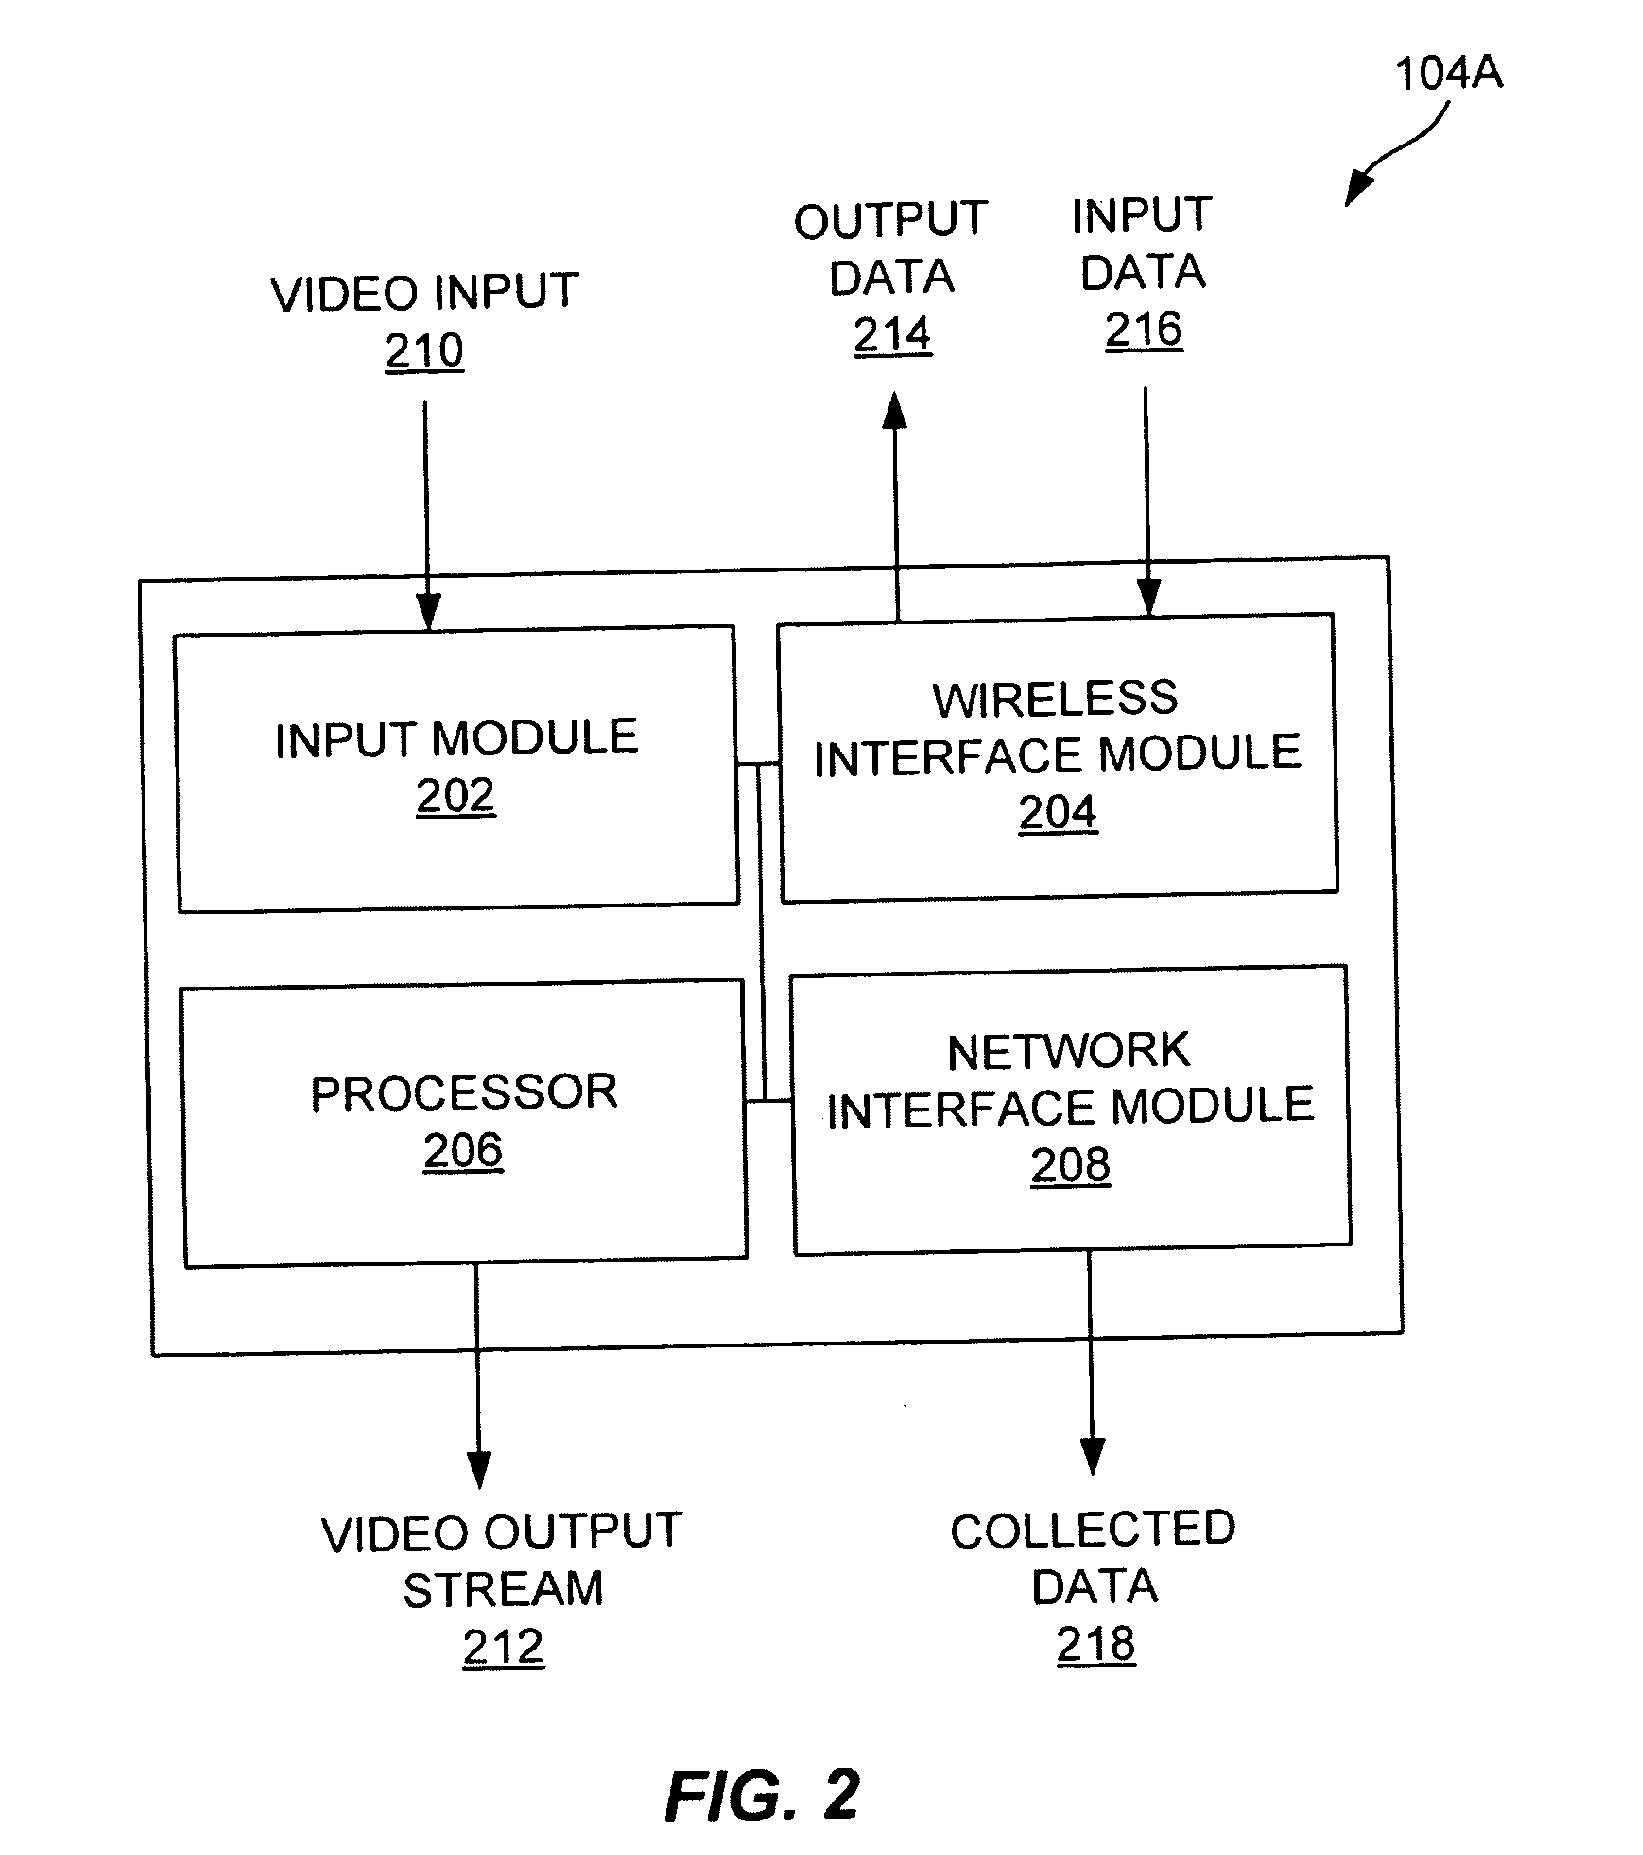 Systems, methods and apparatus for exchanging data between television receivers over a wireless communication link